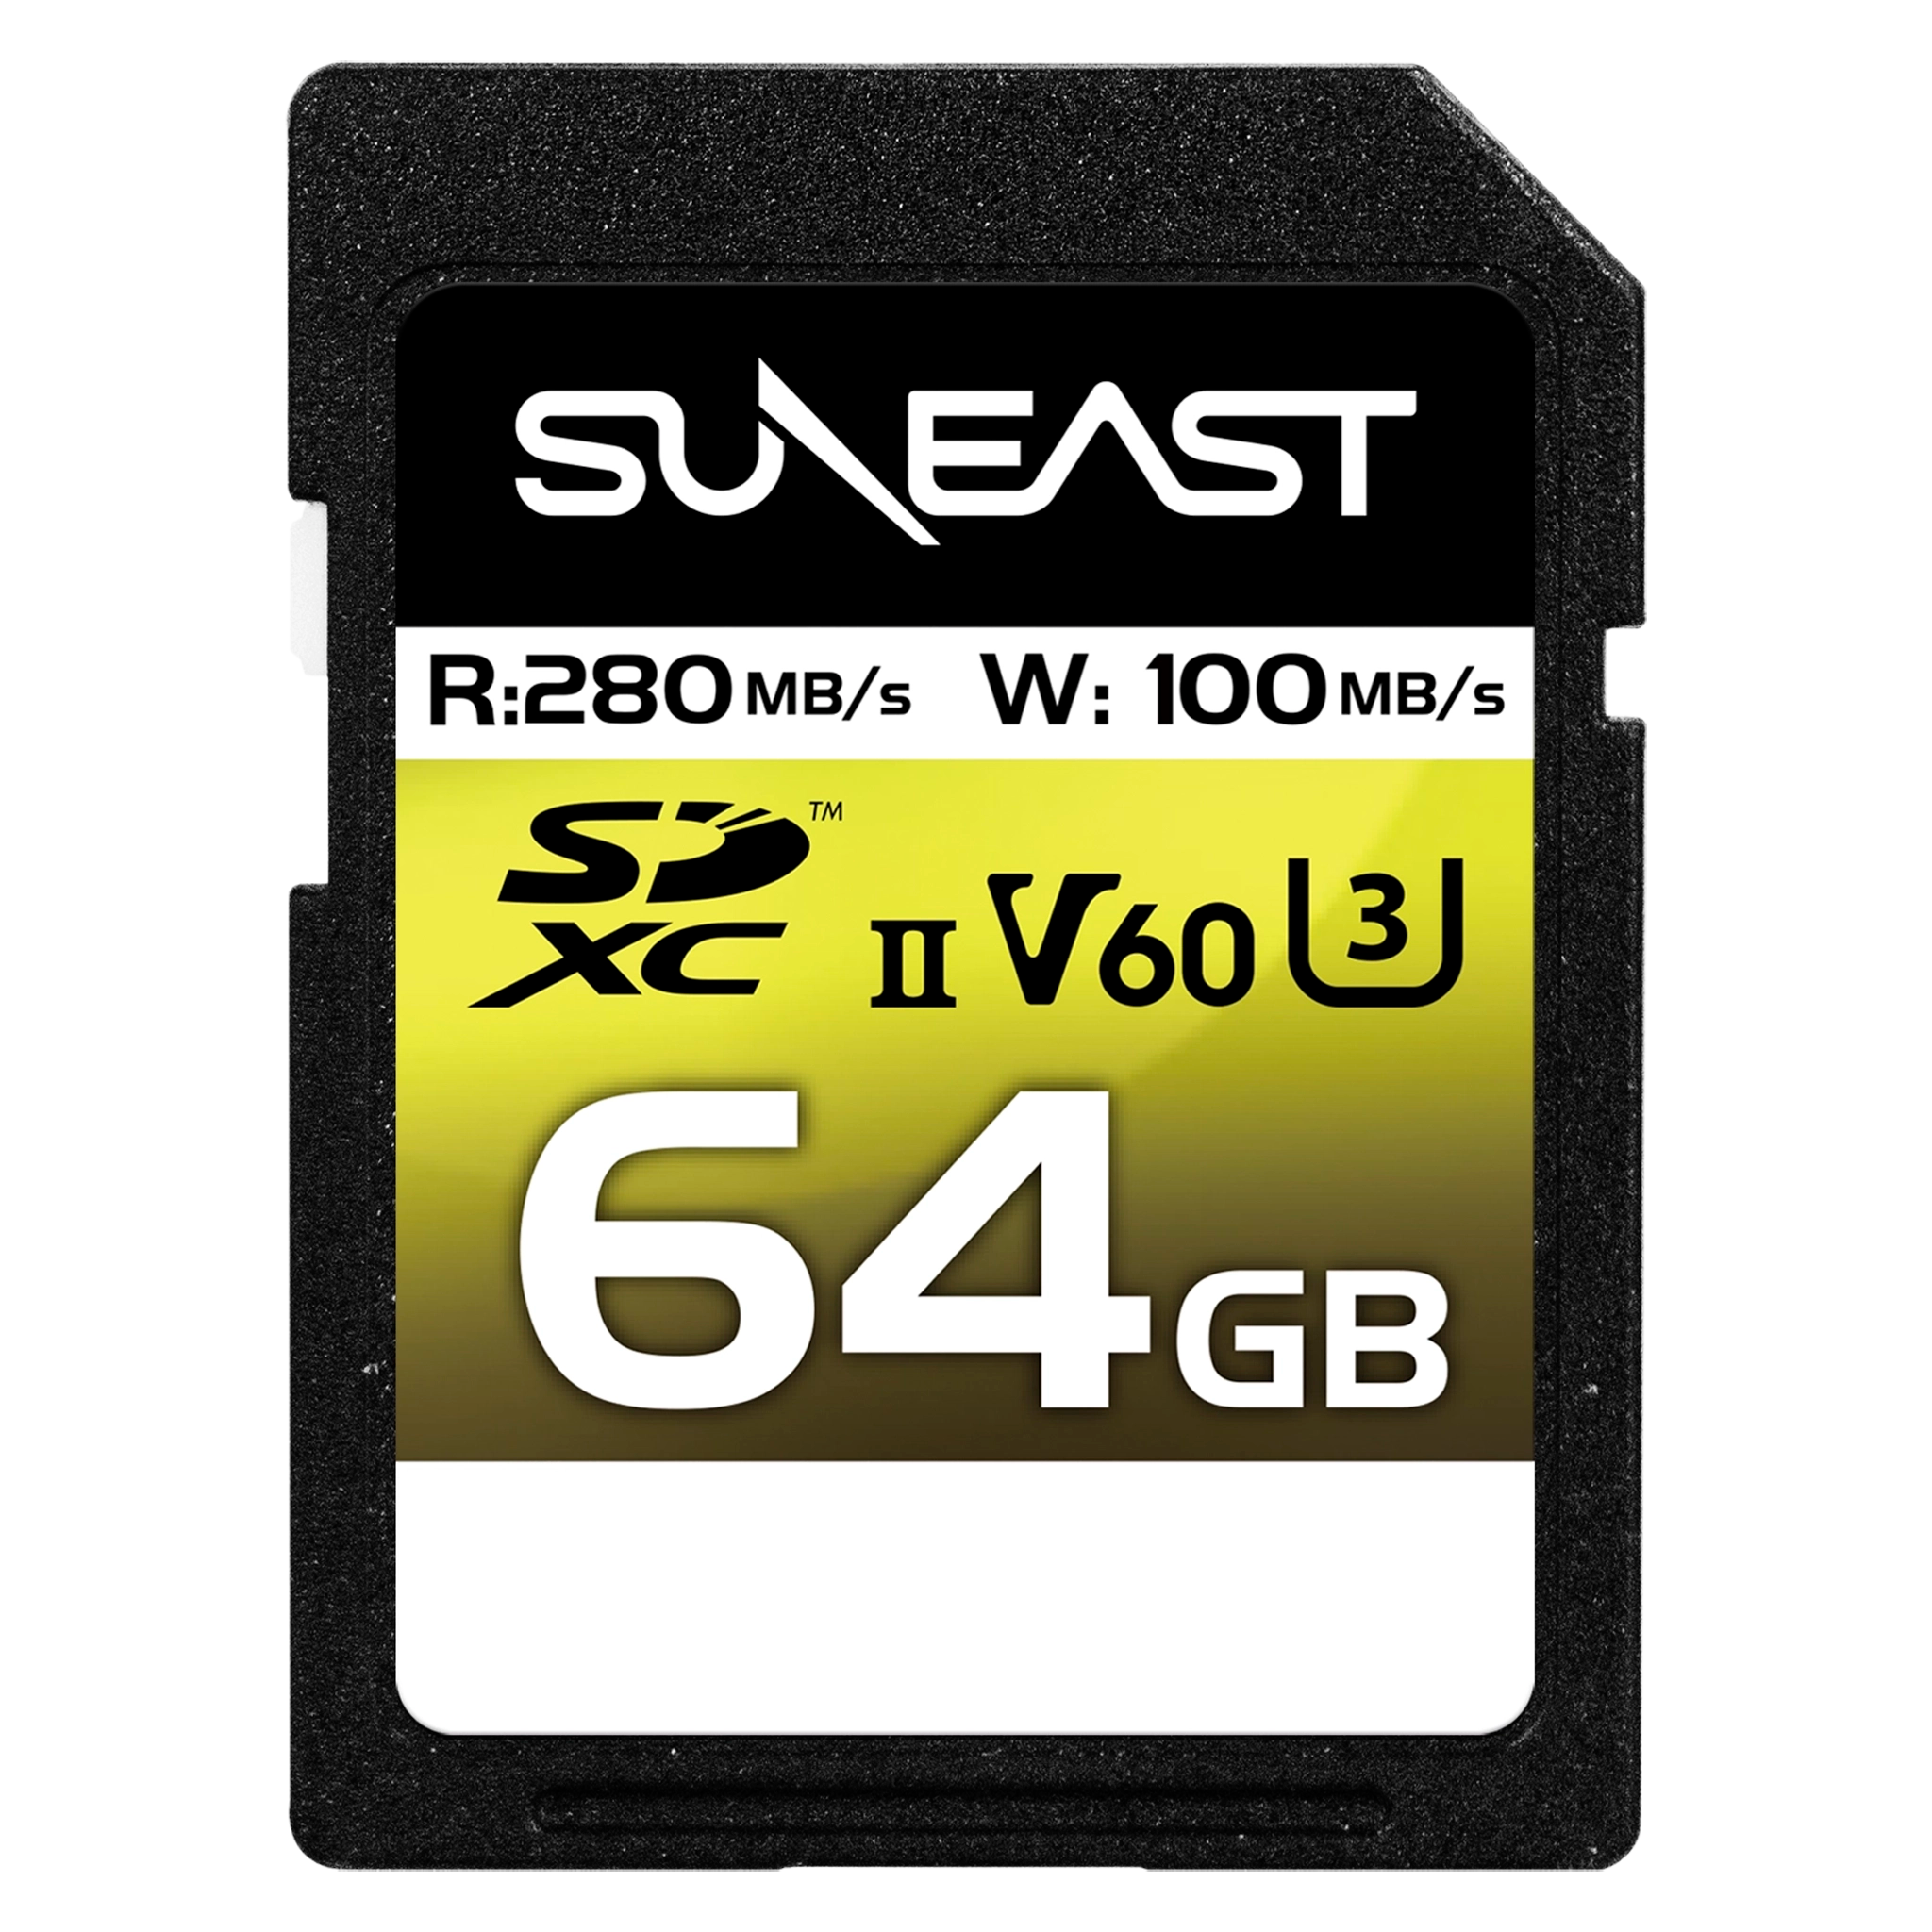 ULTIMATE PRO SDXC UHS-II Card【V60】64GB - SUNEAST online store